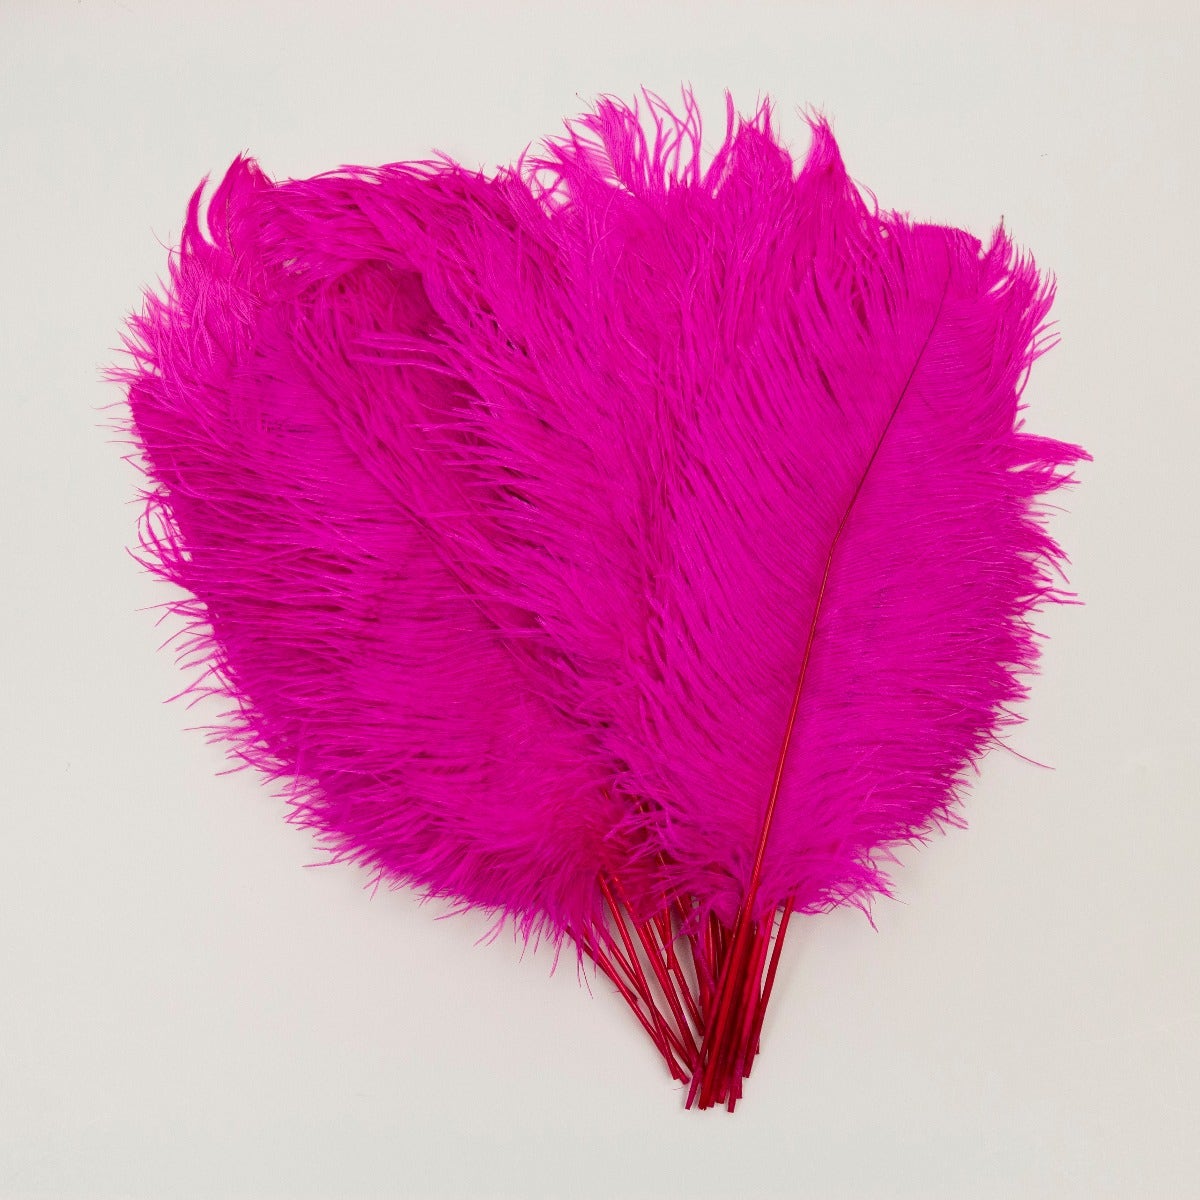 A group of Neon Pink Ostrich Plumes.